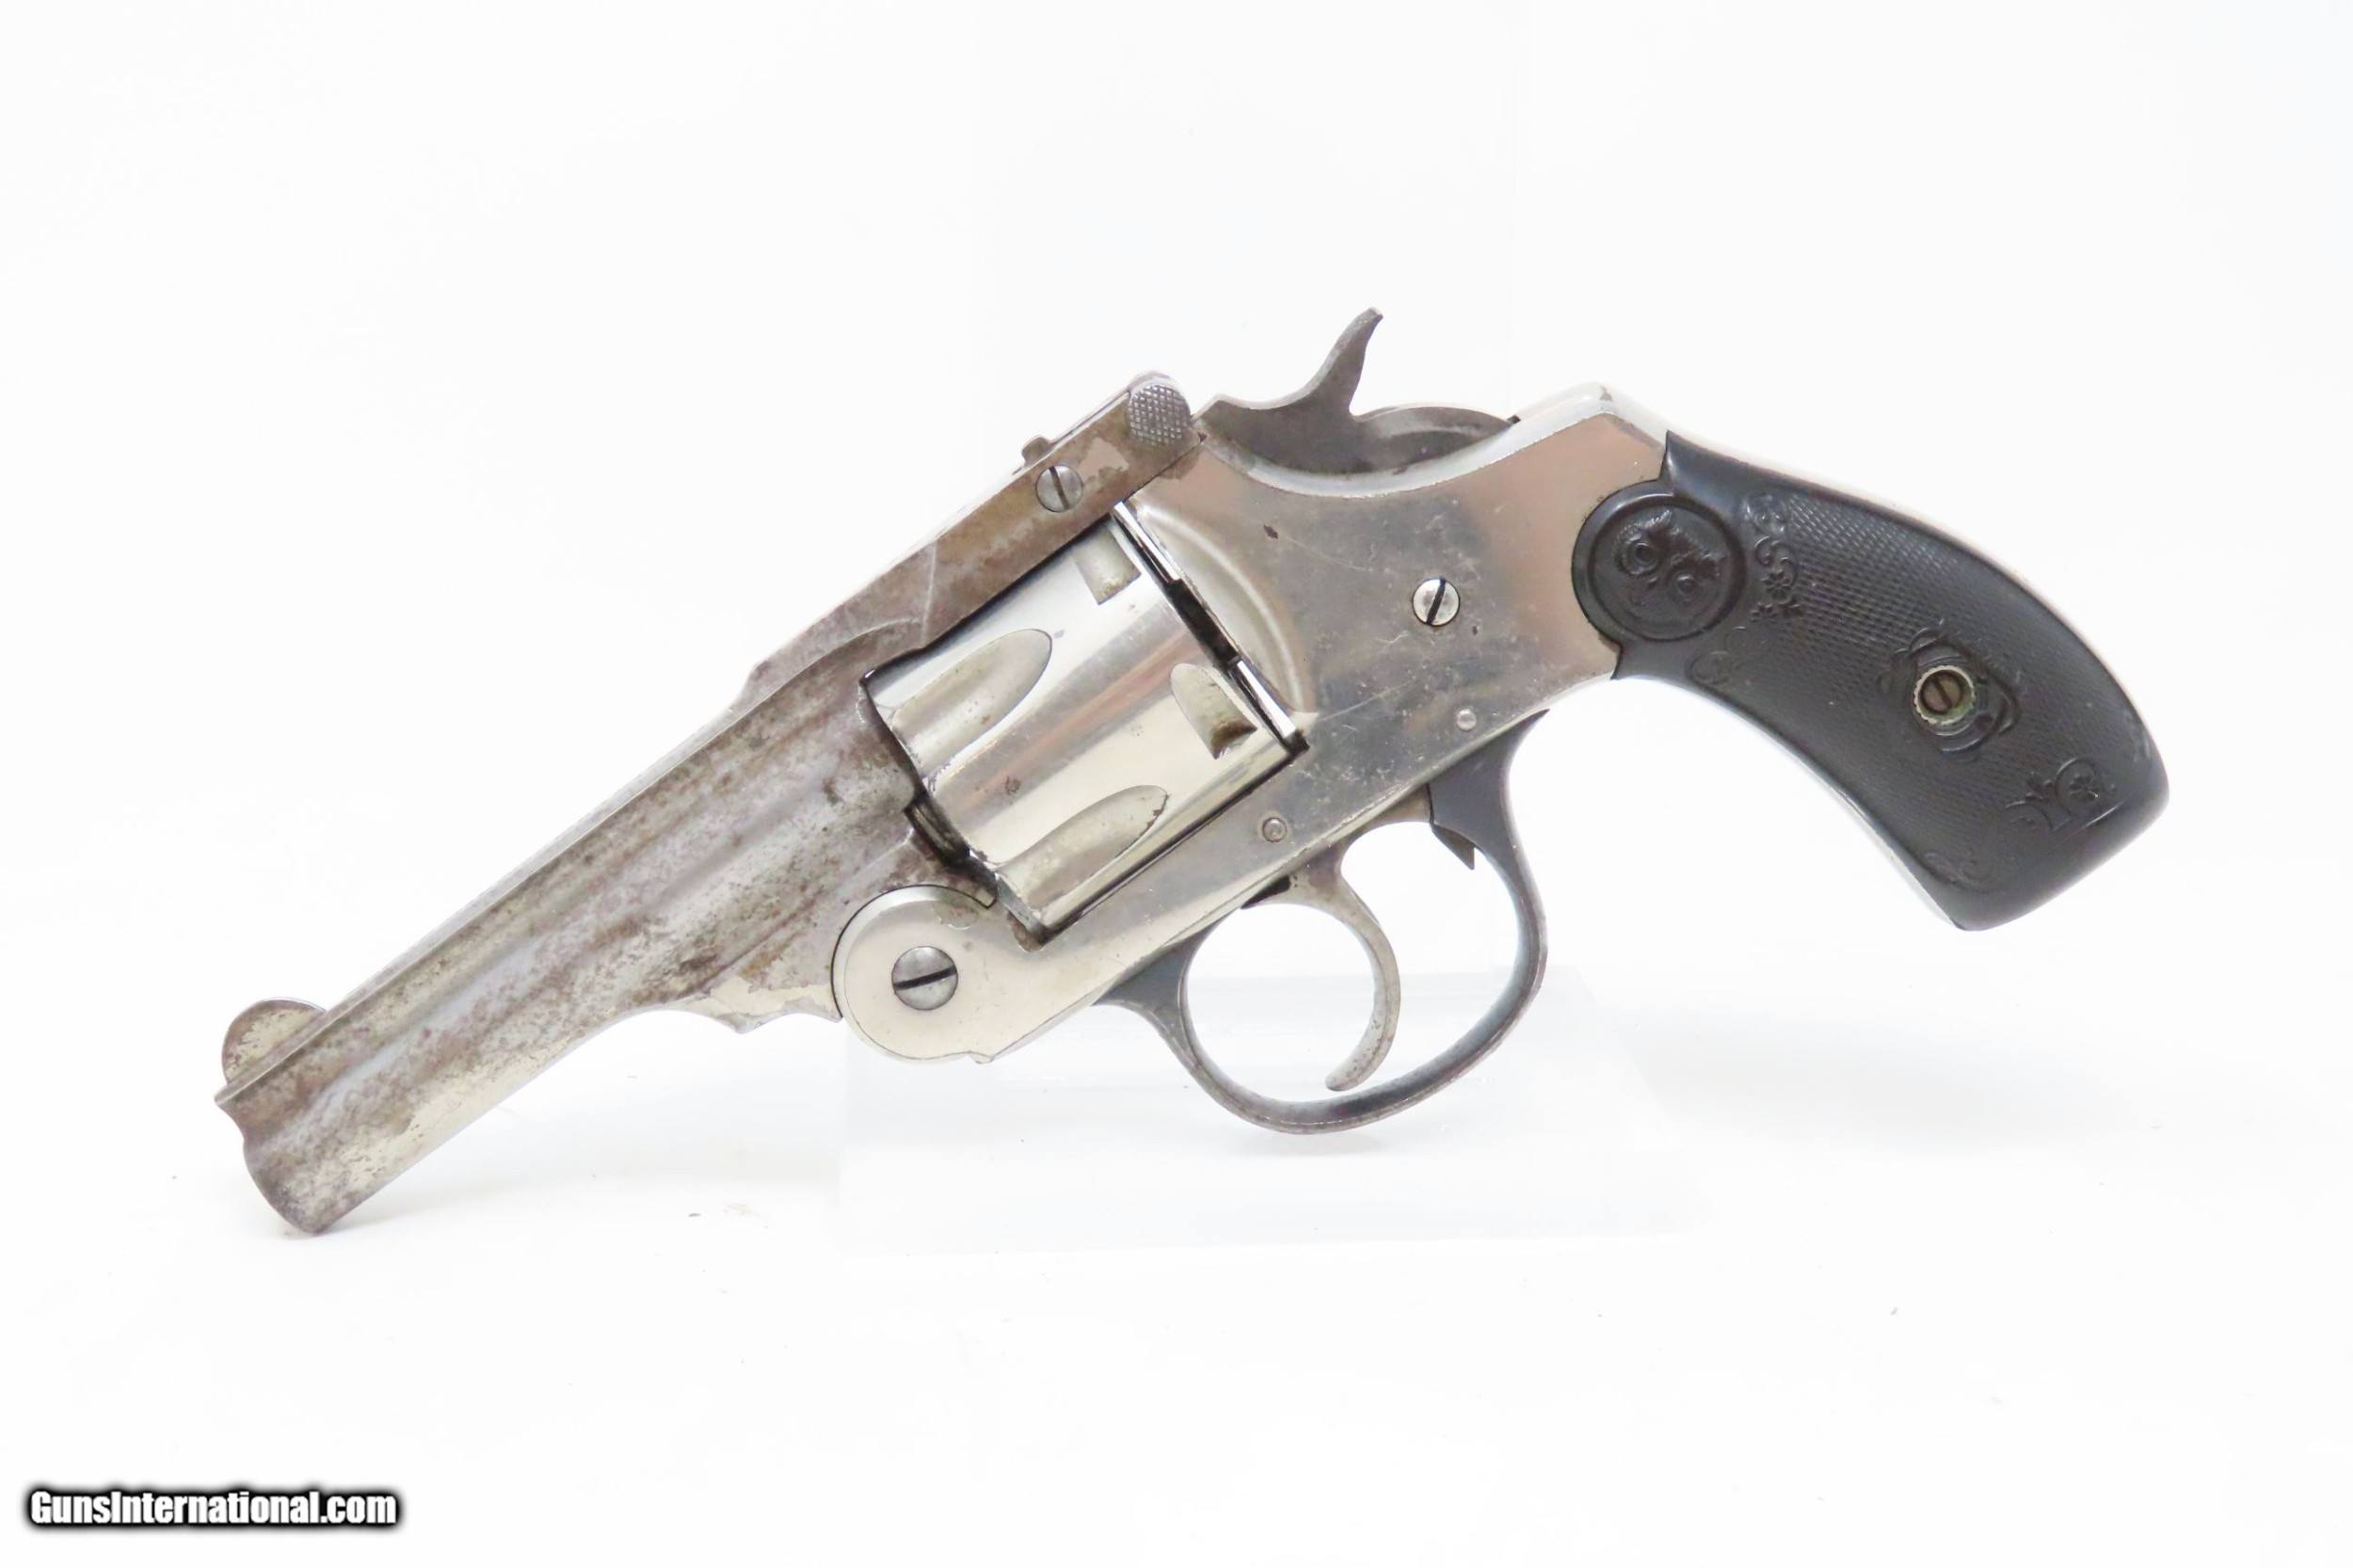 https://images.gunsinternational.com/listings_sub/acc_87874/gi_102041676/IVER-JOHNSON-ARMS-and-CYCLE-WORKS-38-Double-Action-Top-Break-CandR-Revolver-VERY-NICE-Turn-of-the-Ce_102041676_87874_9D5CBD7856D8555A.jpg